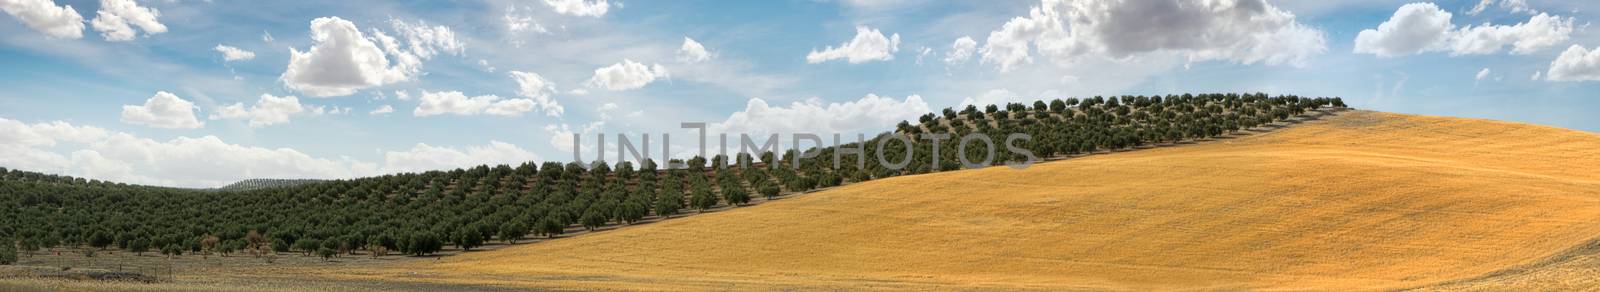 Panoramic image of olive plantation and cloudy sky. Trees on rows